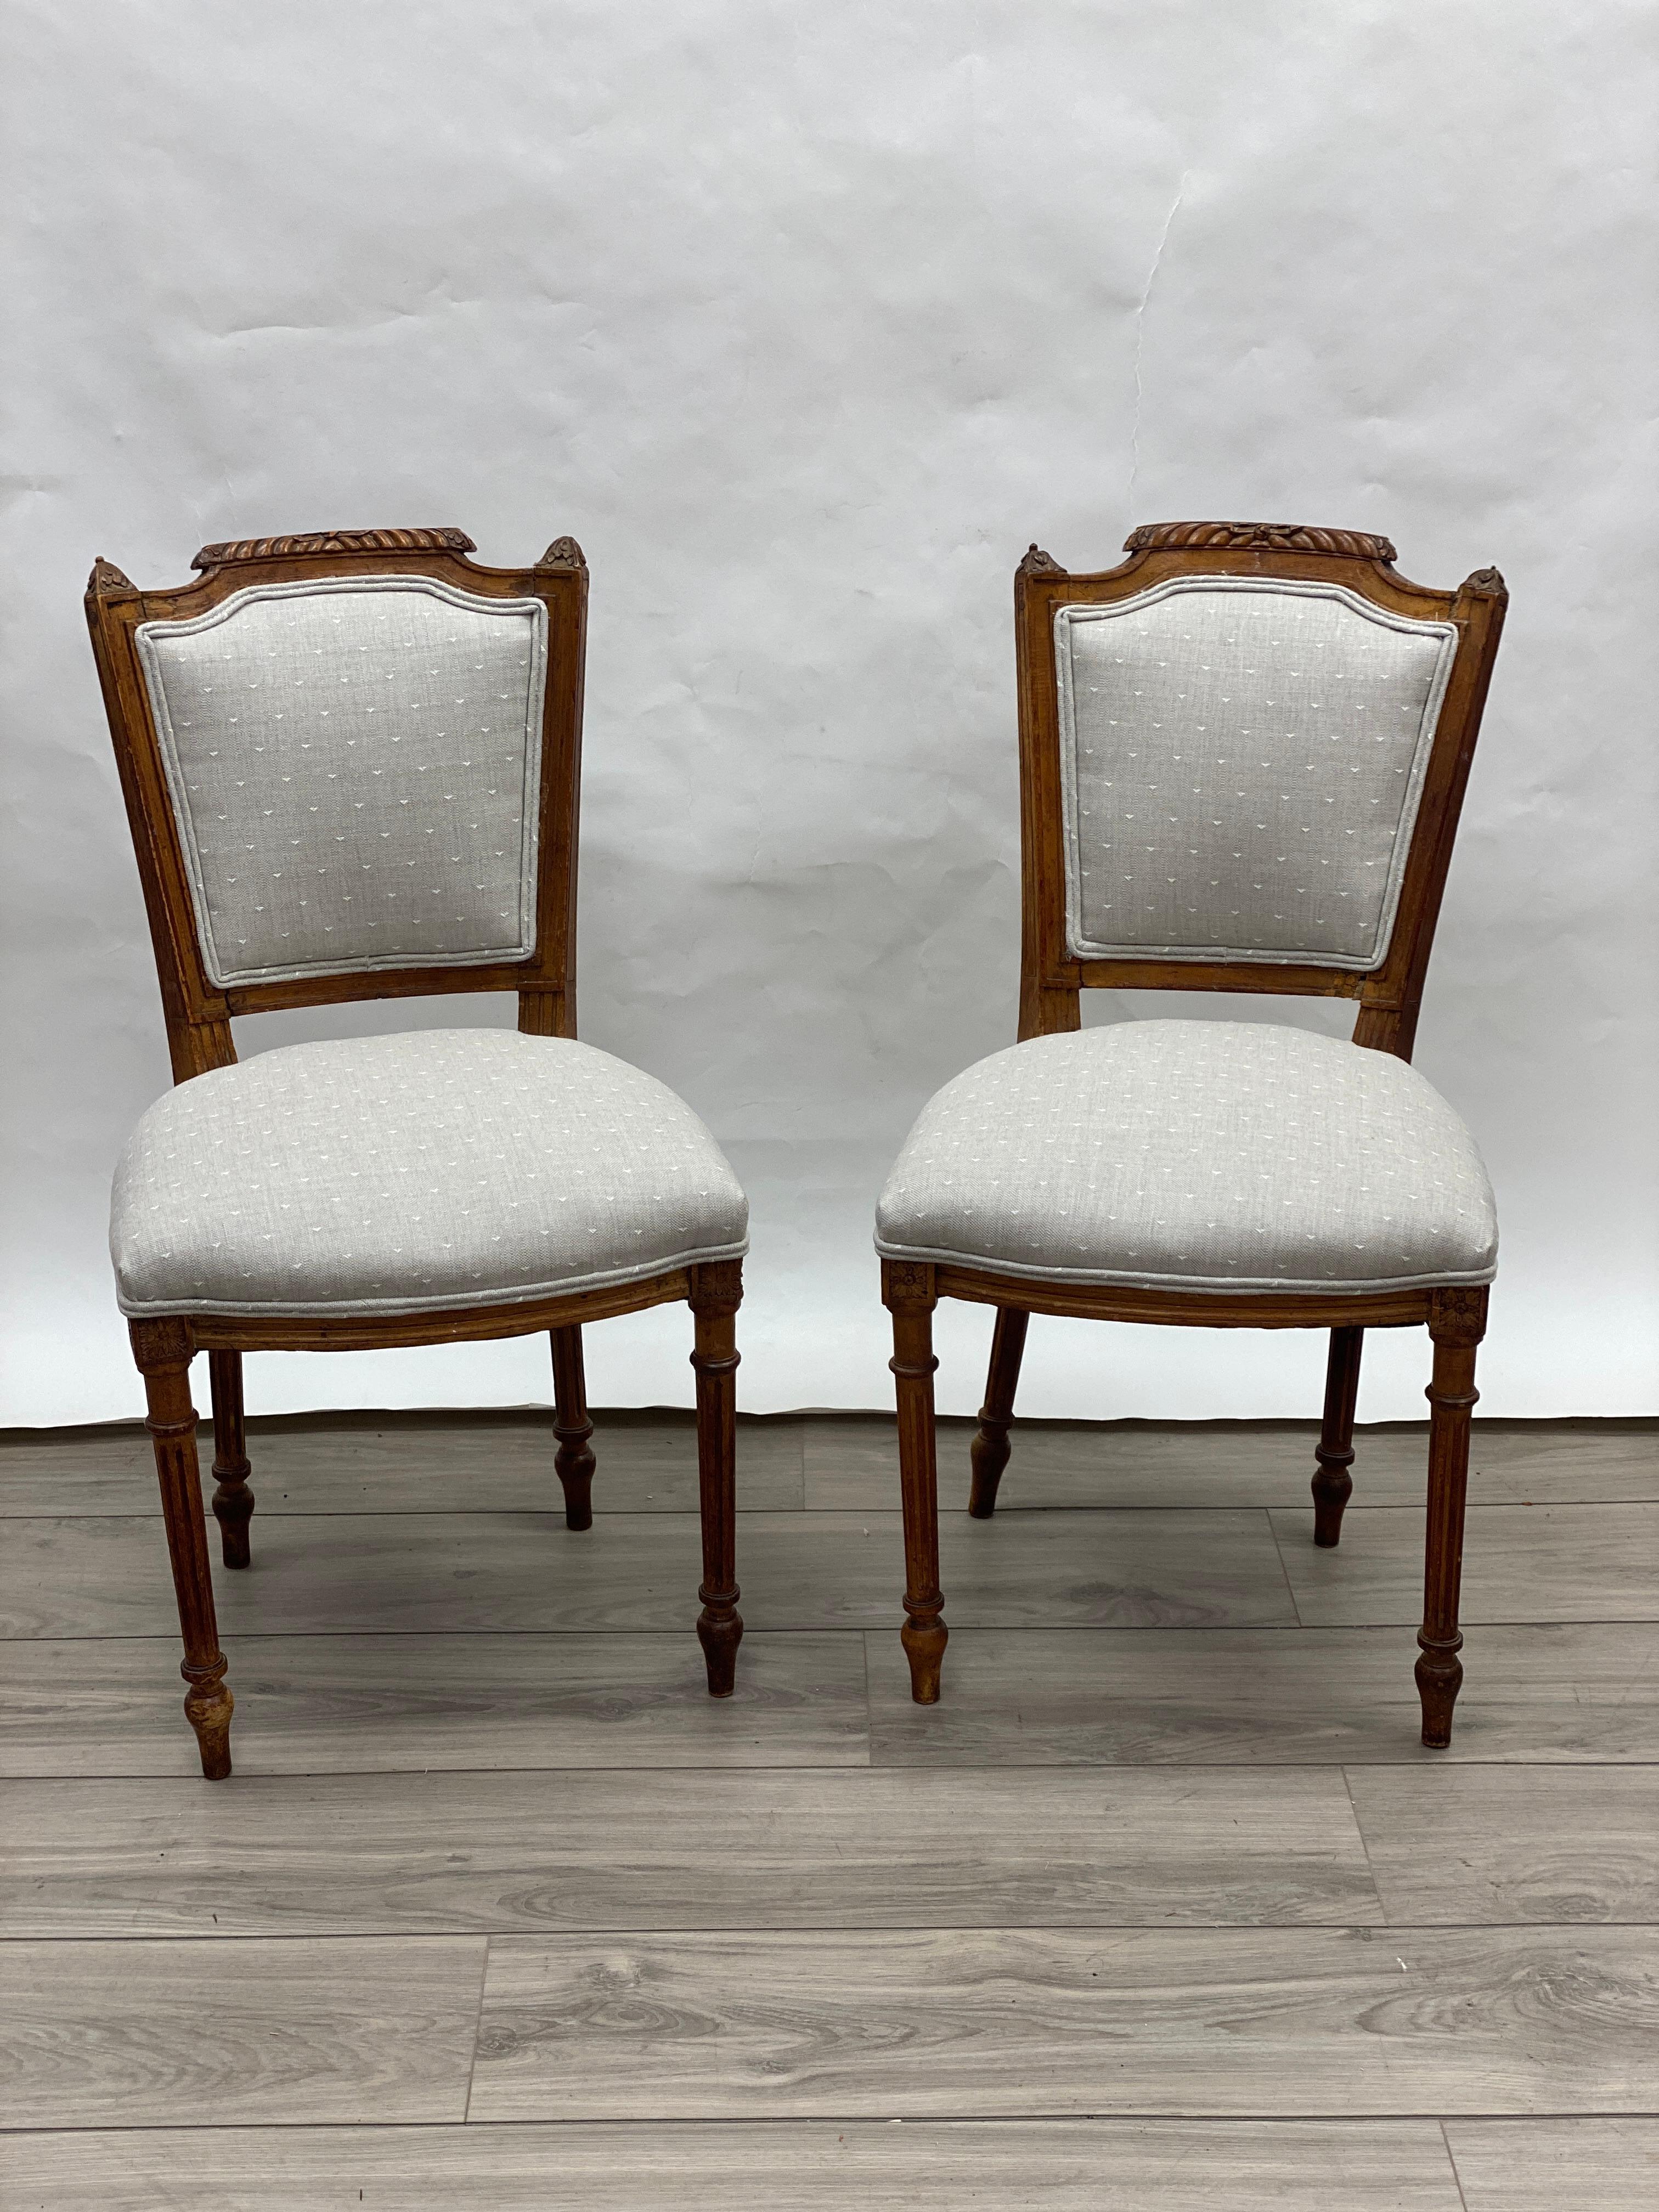 Wonderful pair of newly upholstered period French Louis XVI walnut side chairs. Fresh Upholstery, good condition. 
Measures: 33